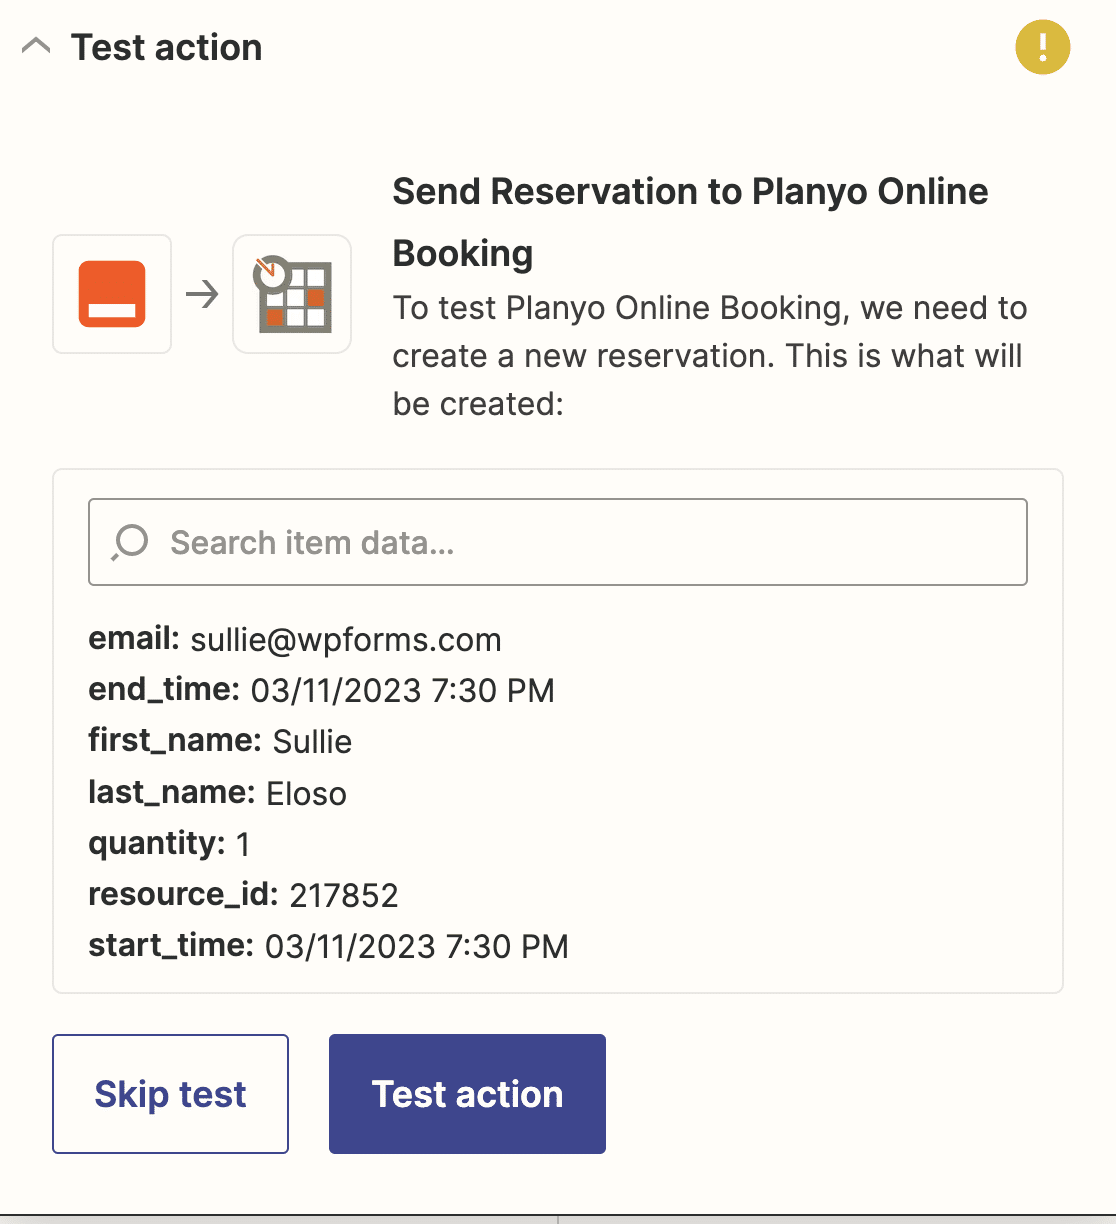 Testing your Planyo connection in Zapier